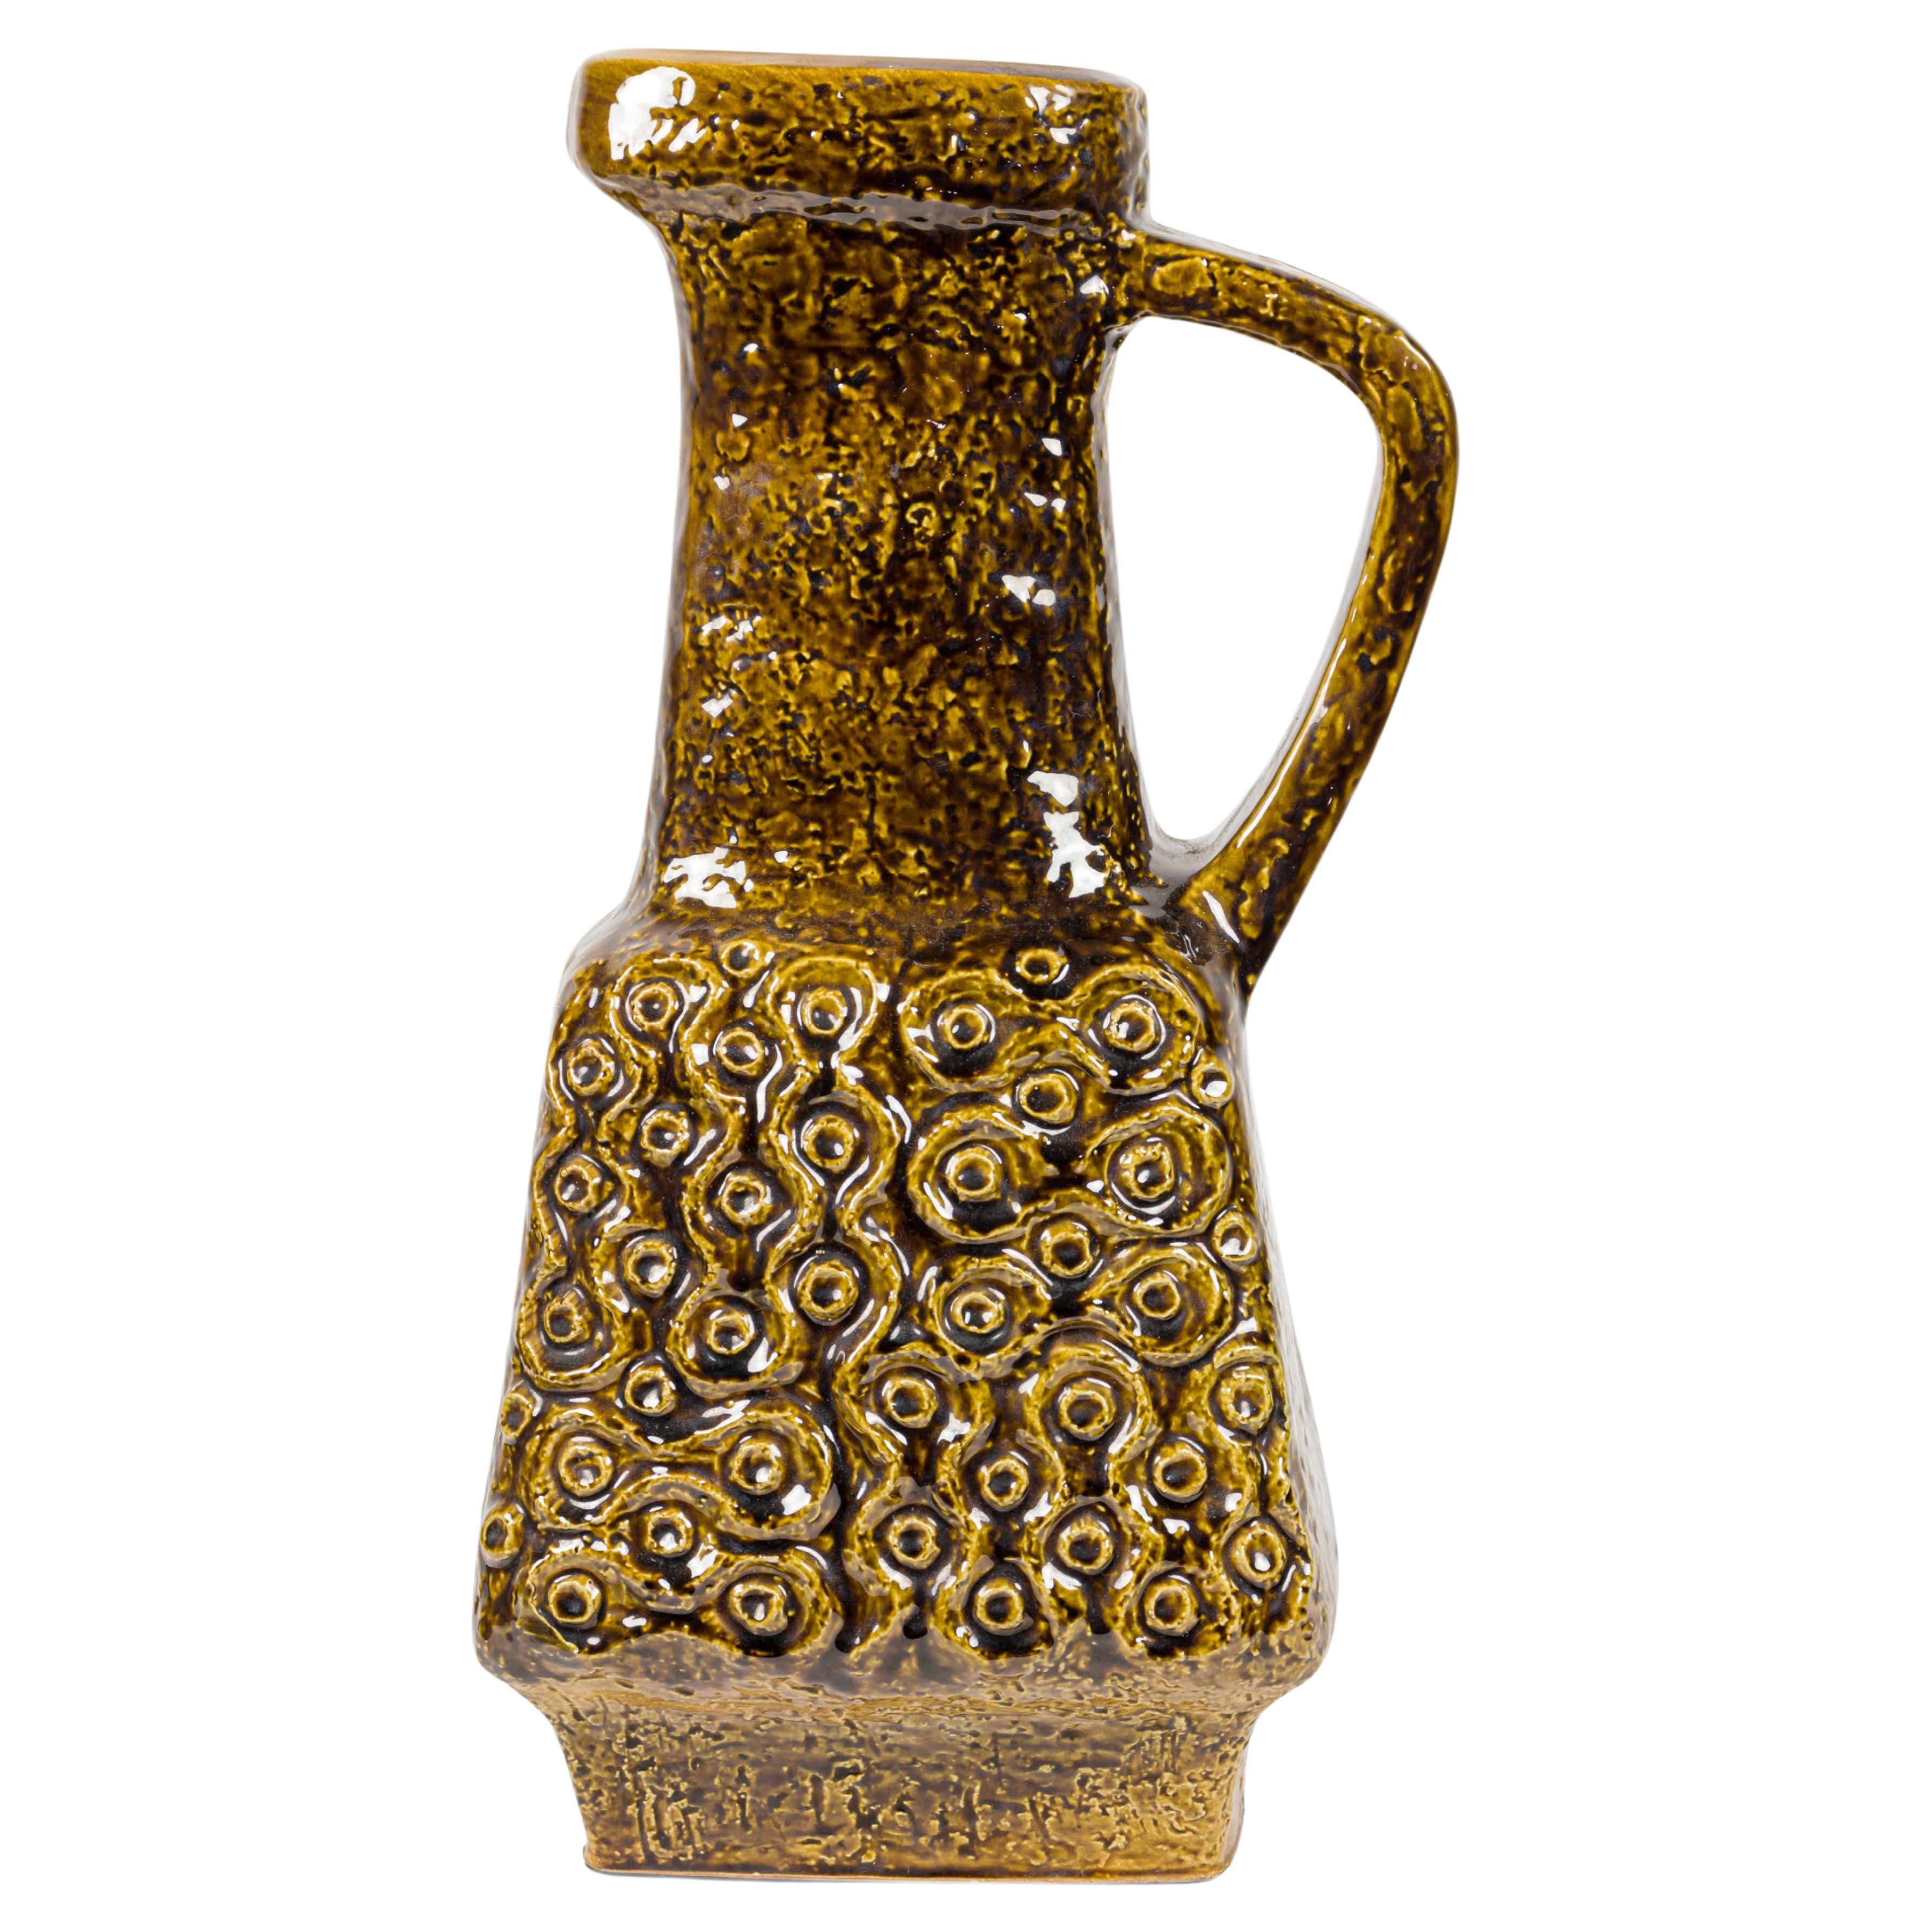 Bay Keramik West German Mid-Century Pitcher Vase with Incised Geometric Details For Sale